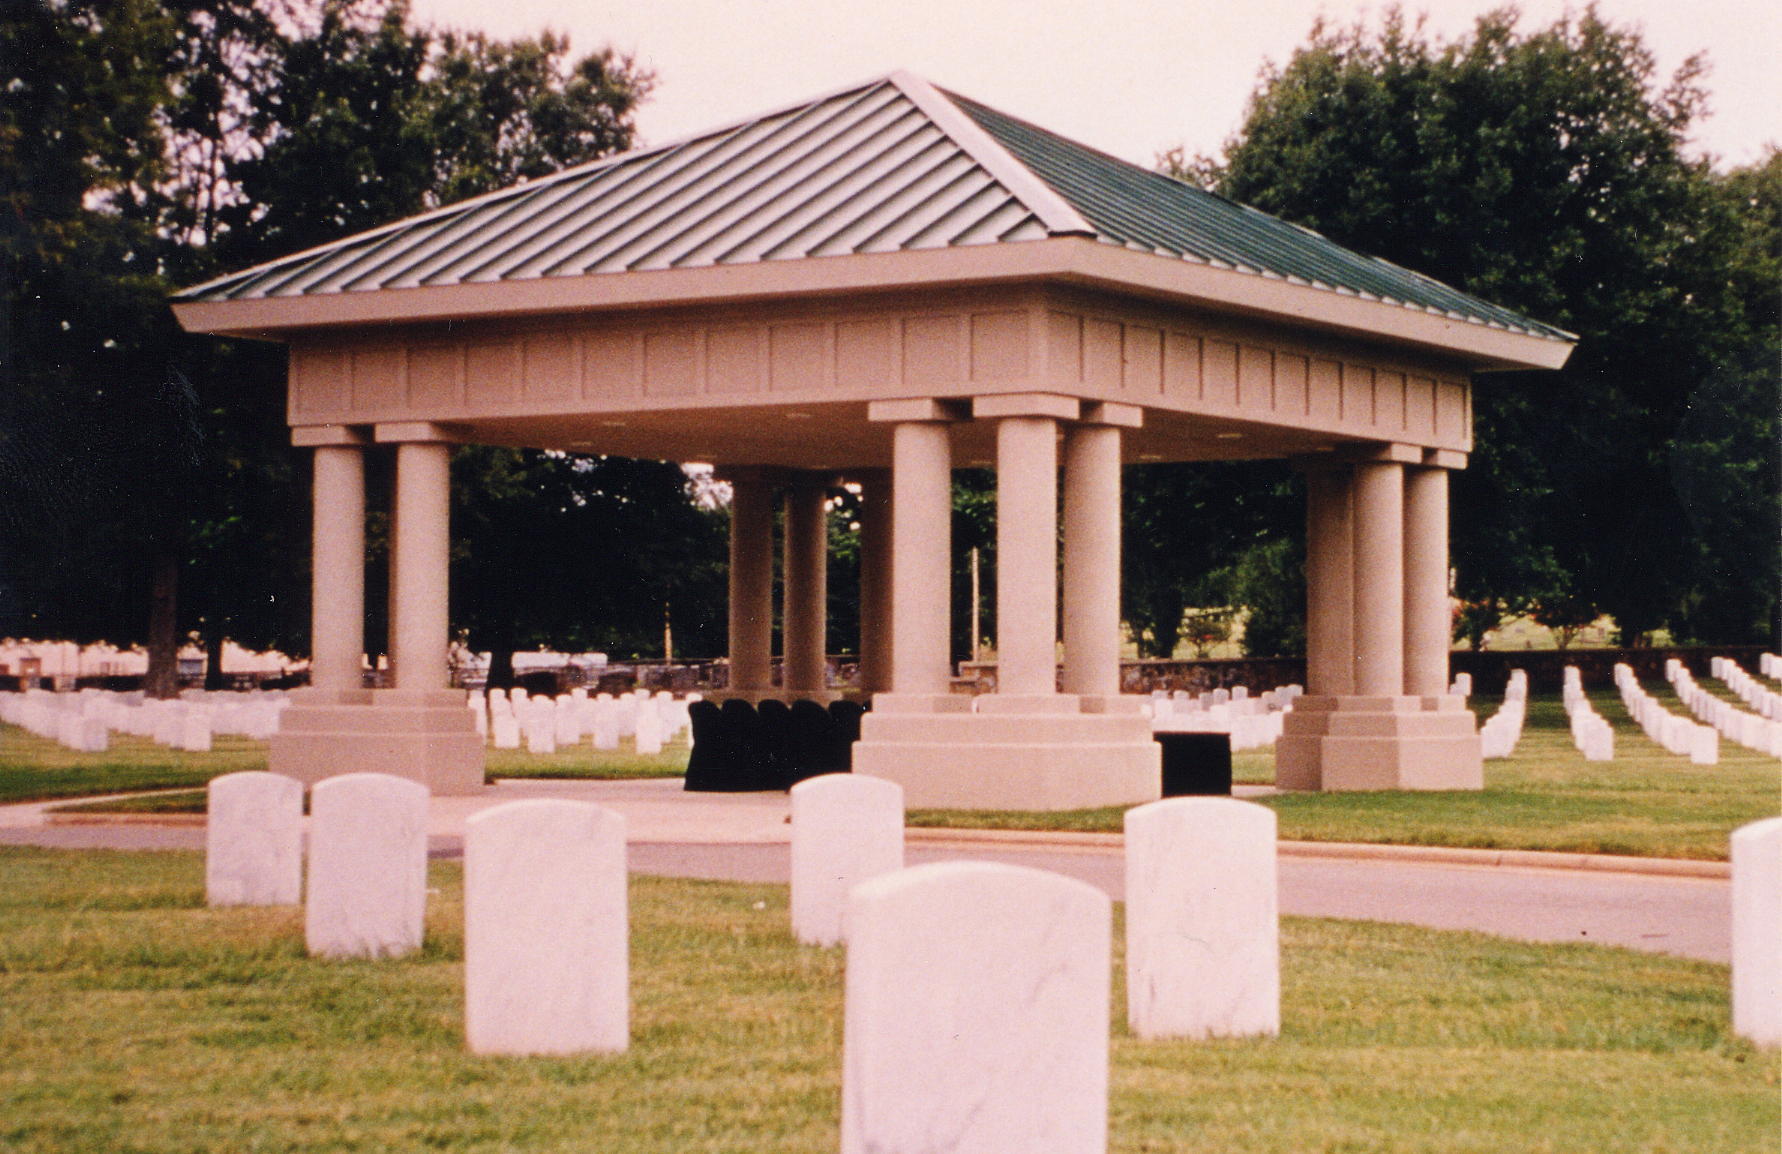 A photo of an open committal shelter rectangular in shape with three stone columns at each corner. Upright markers surround the shelter on three sides.